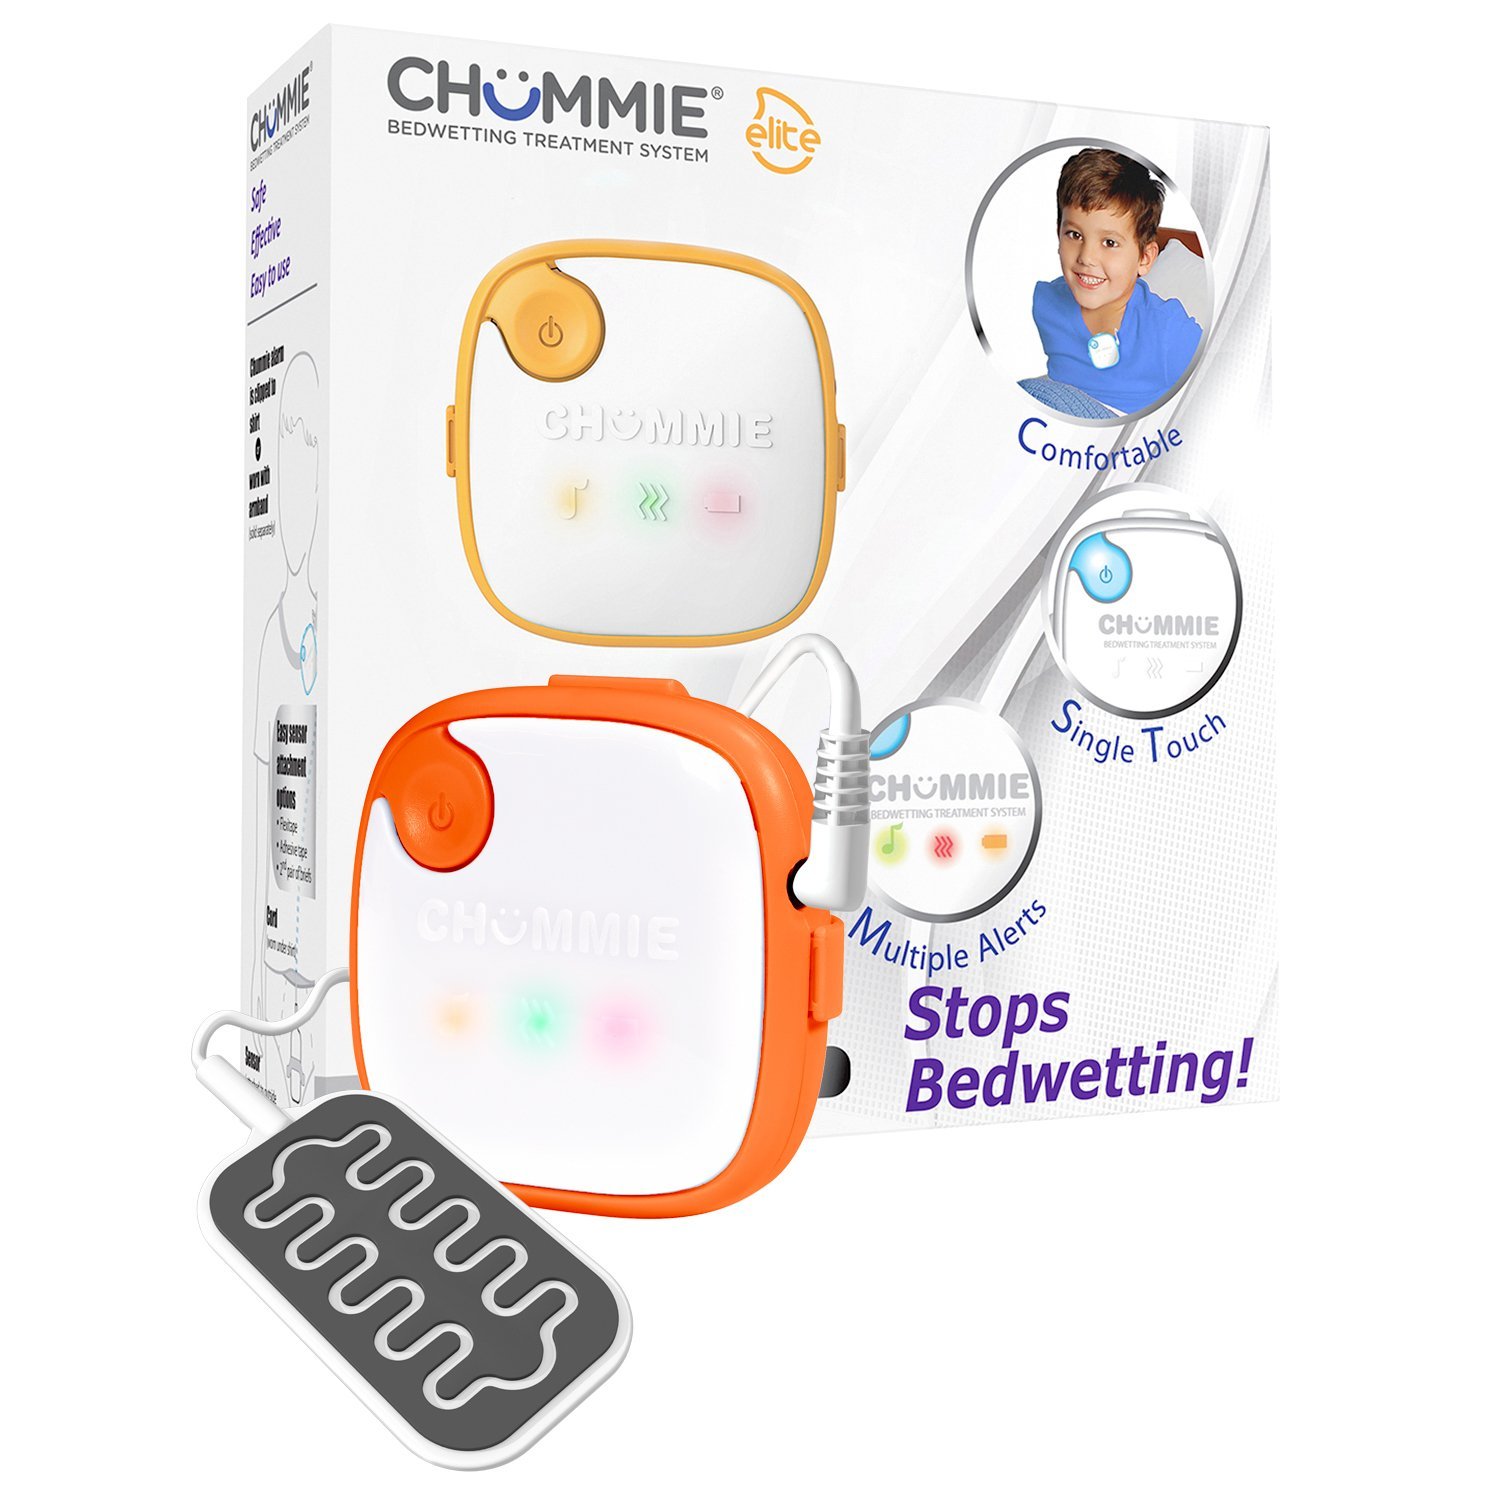 Chummie Elite Bedwetting Alarm For Children And Deep Sleepers  Award Winning Bedwetting Alarm System With Loud Sounds And Strong Vibrations Orange